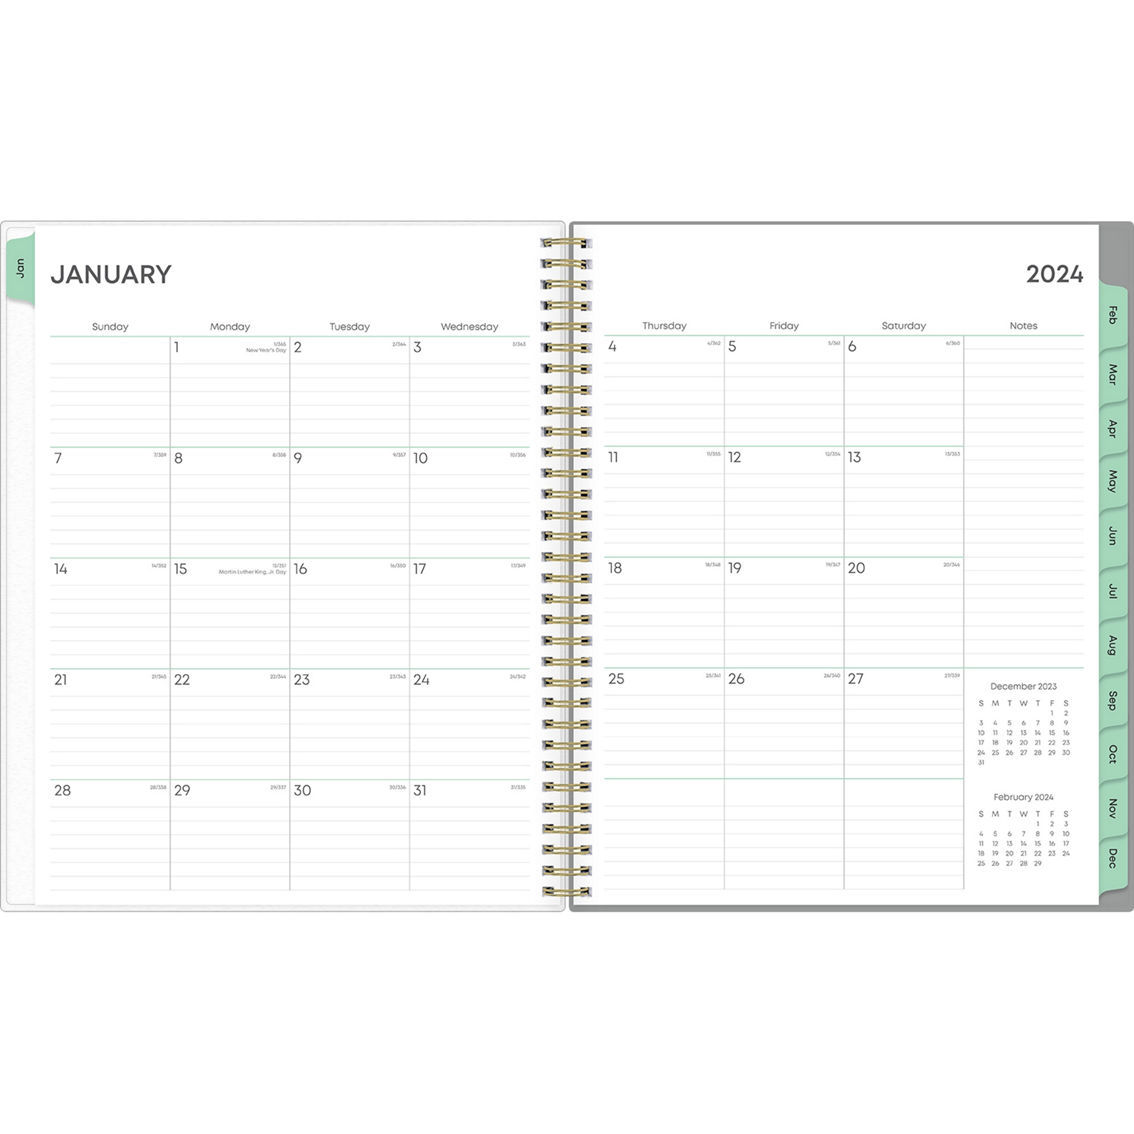 Bluesky 2024 Sophie Frosted 8.5 in. x 11 in. Planning Calendar - Image 3 of 8